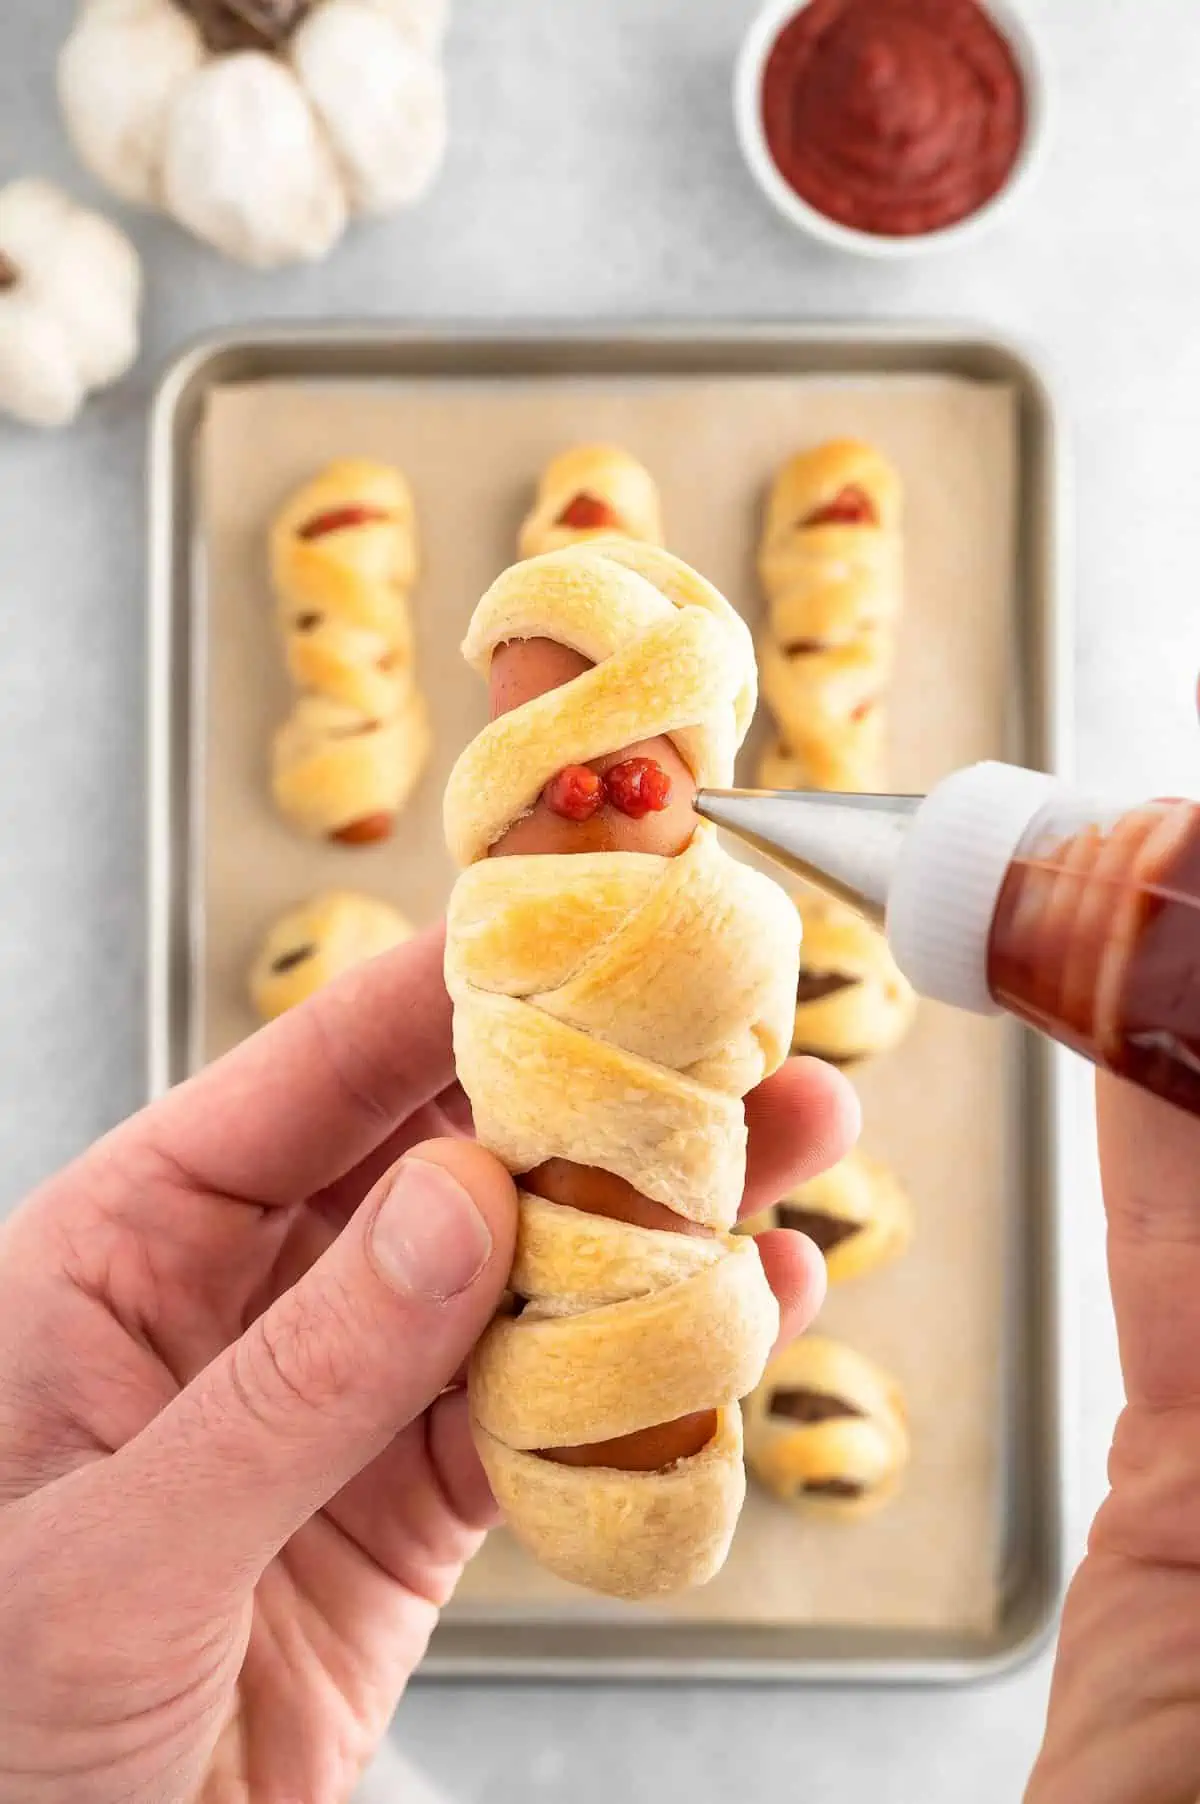 Hand holding a mummy dog while adding ketchup eyes with a piping tool.